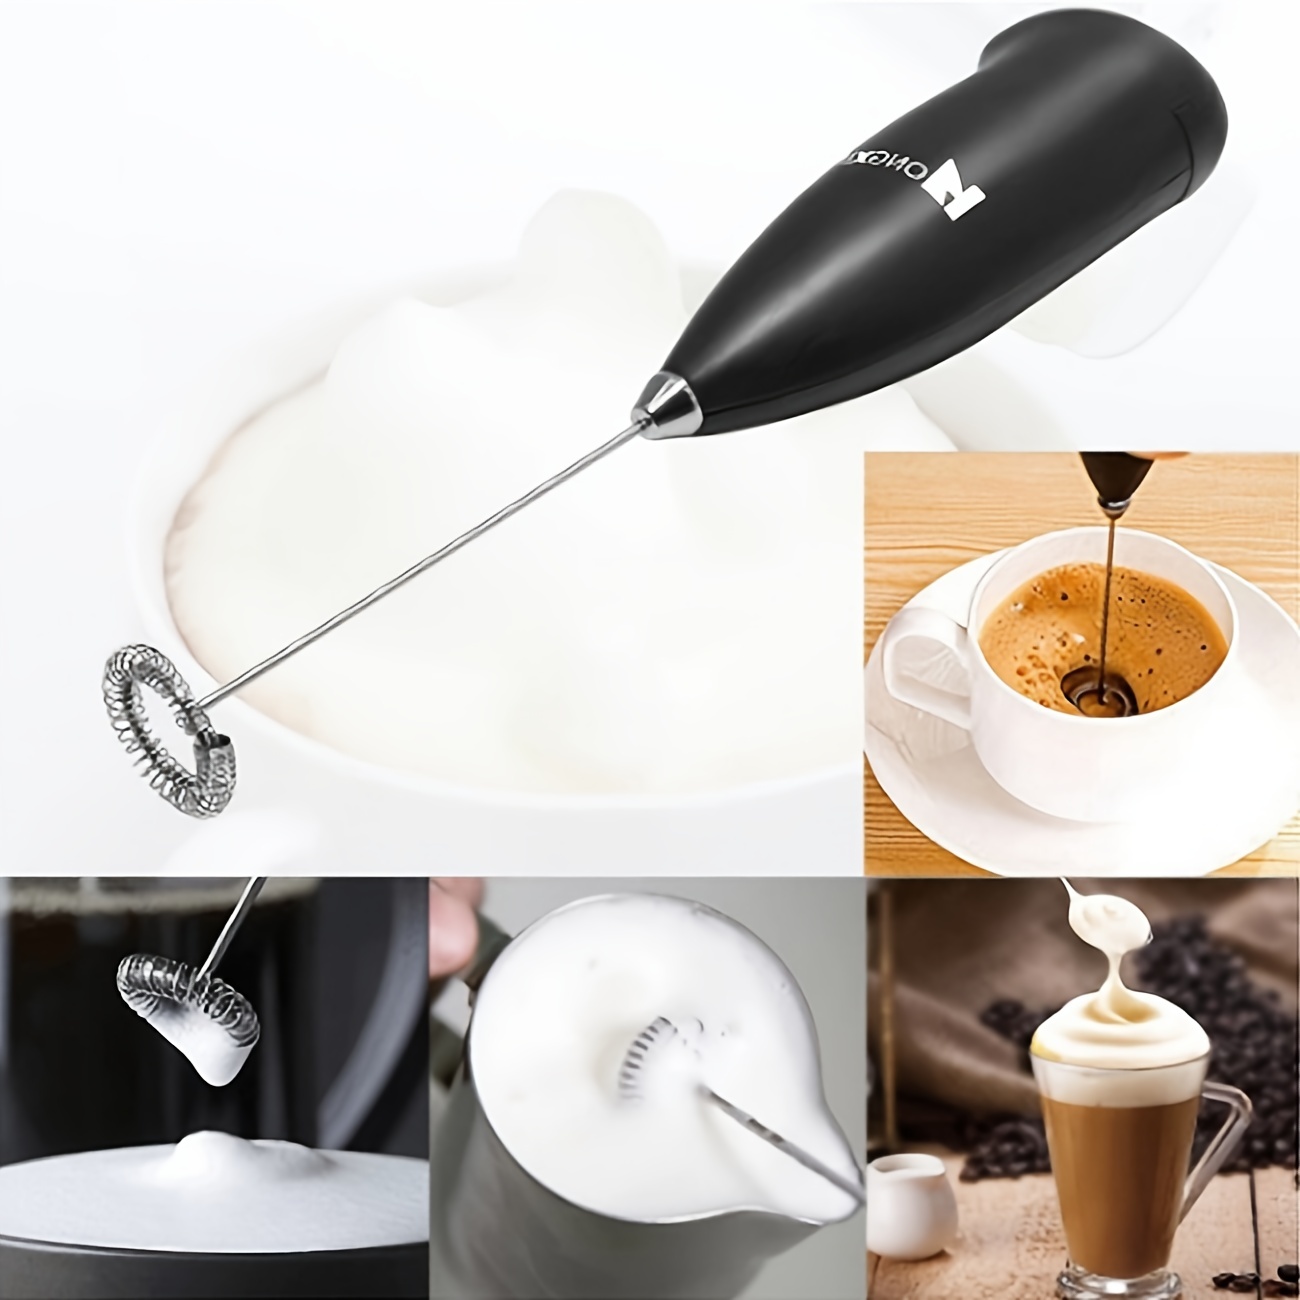 Mini Handheld Milk Frother For Coffee, Home Baking, Whisk Cream, Cordless  Electric Hand Mixer And Egg Beater